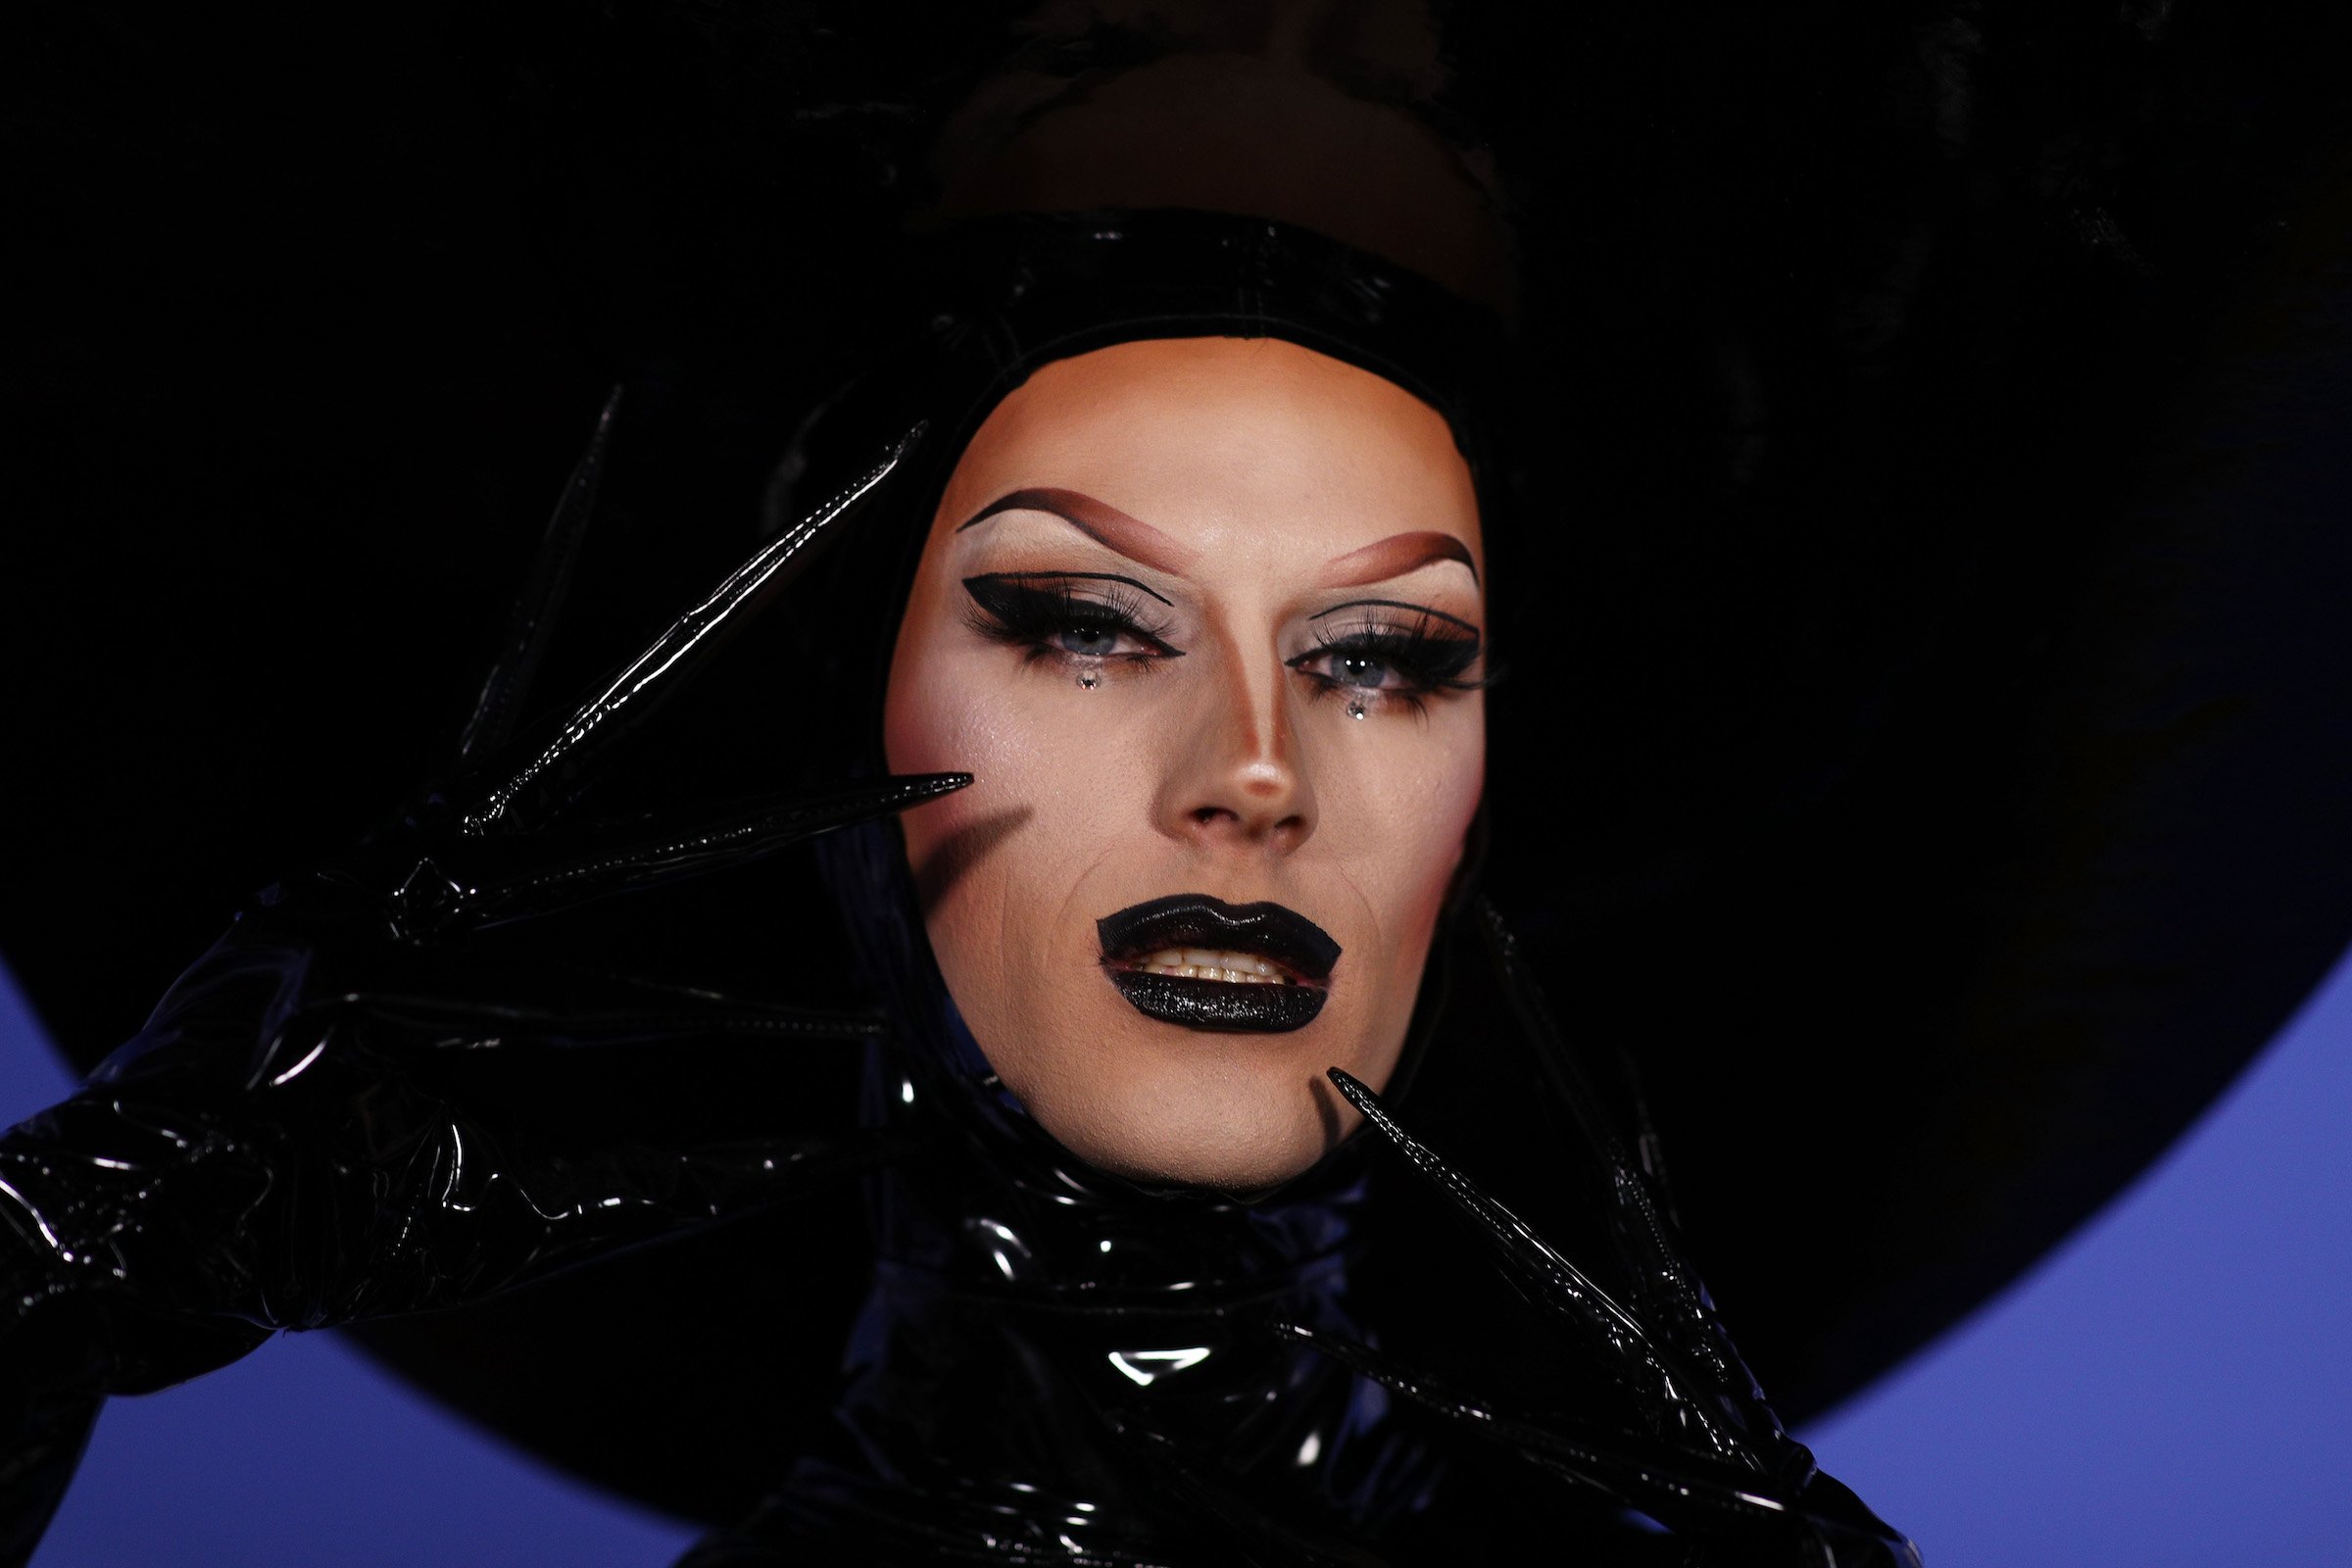 ‘RuPaul’s Drag Race Down Under’: Queens Confronted Scarlet Adams About Doing Blackface, But It Was Edited Out